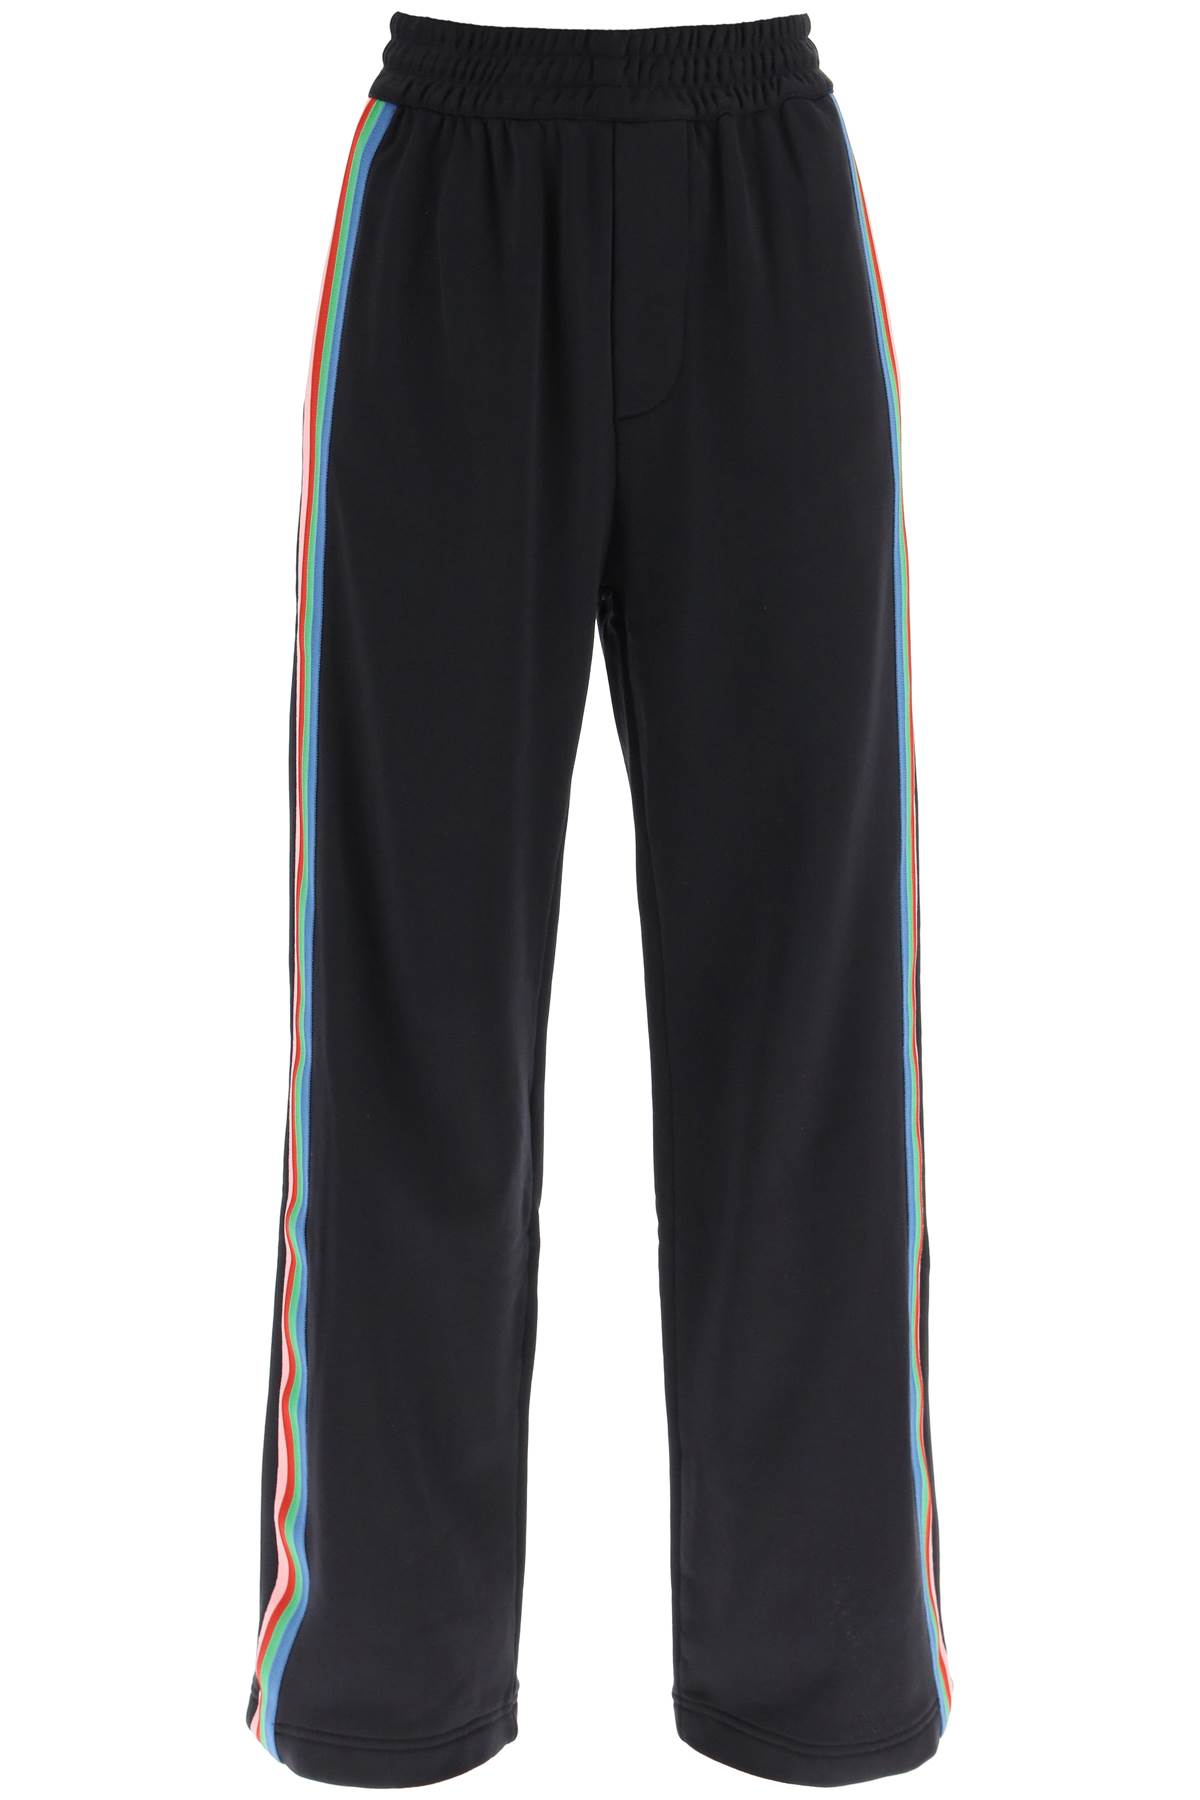 DSQUARED2 SWEATPANTS WITH SIDE BANDS